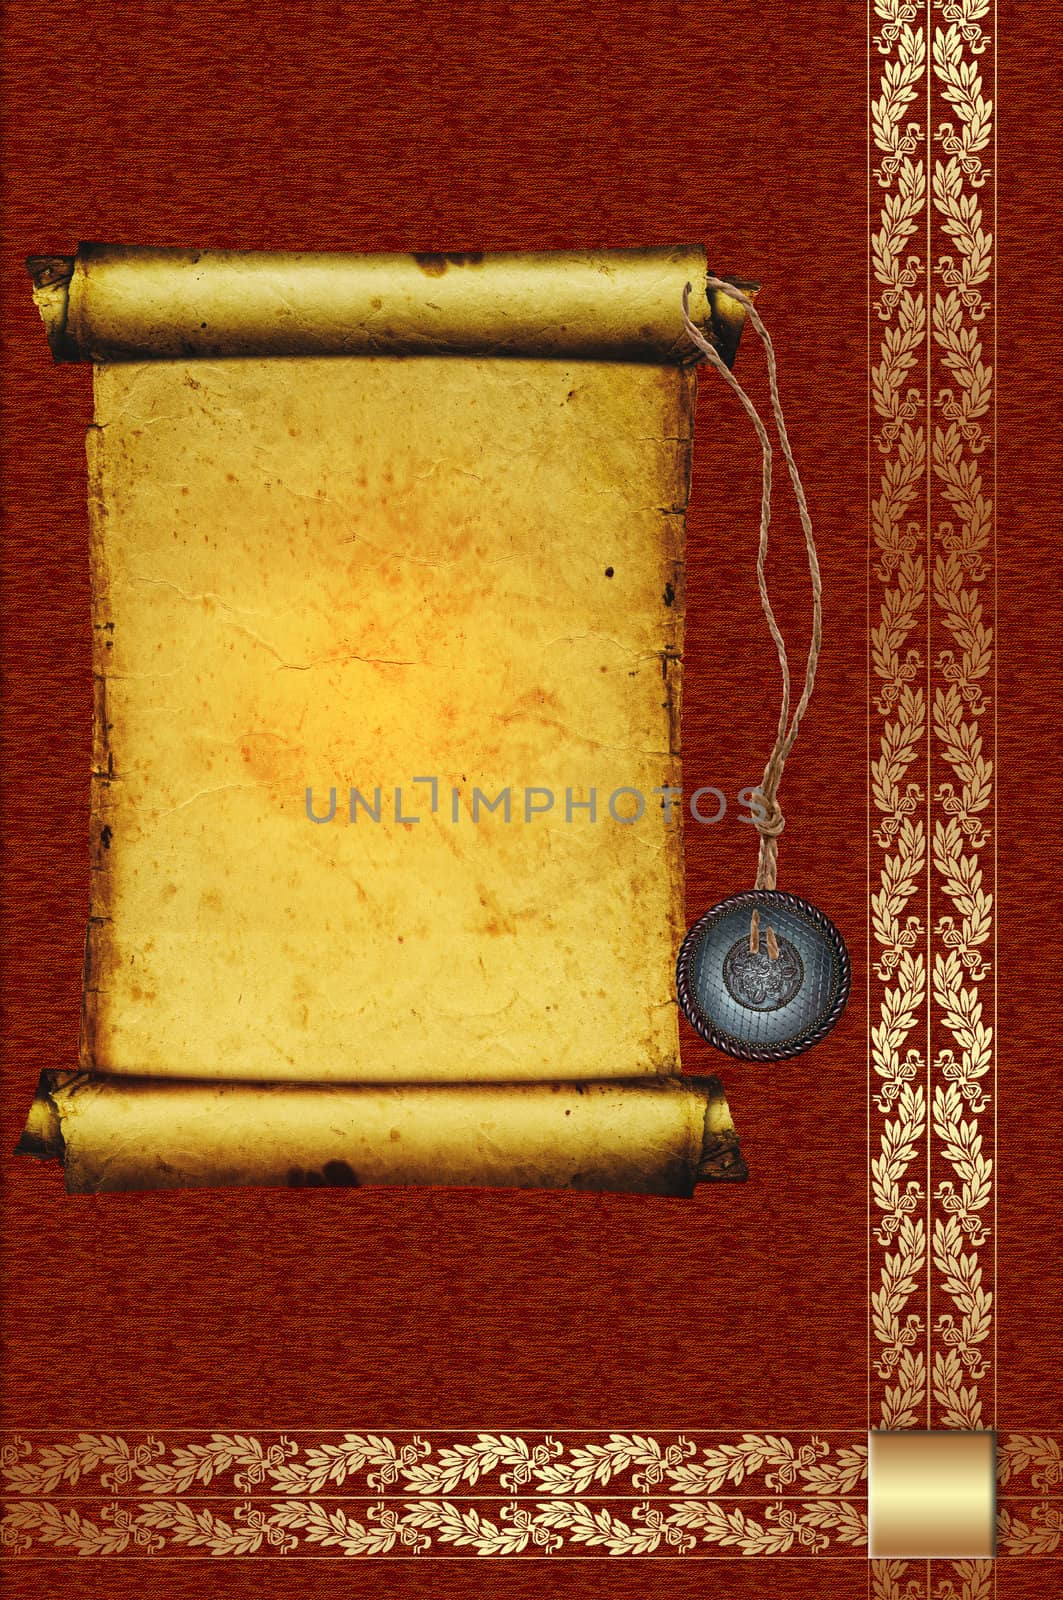 Old parchment on decorative background with golden elements